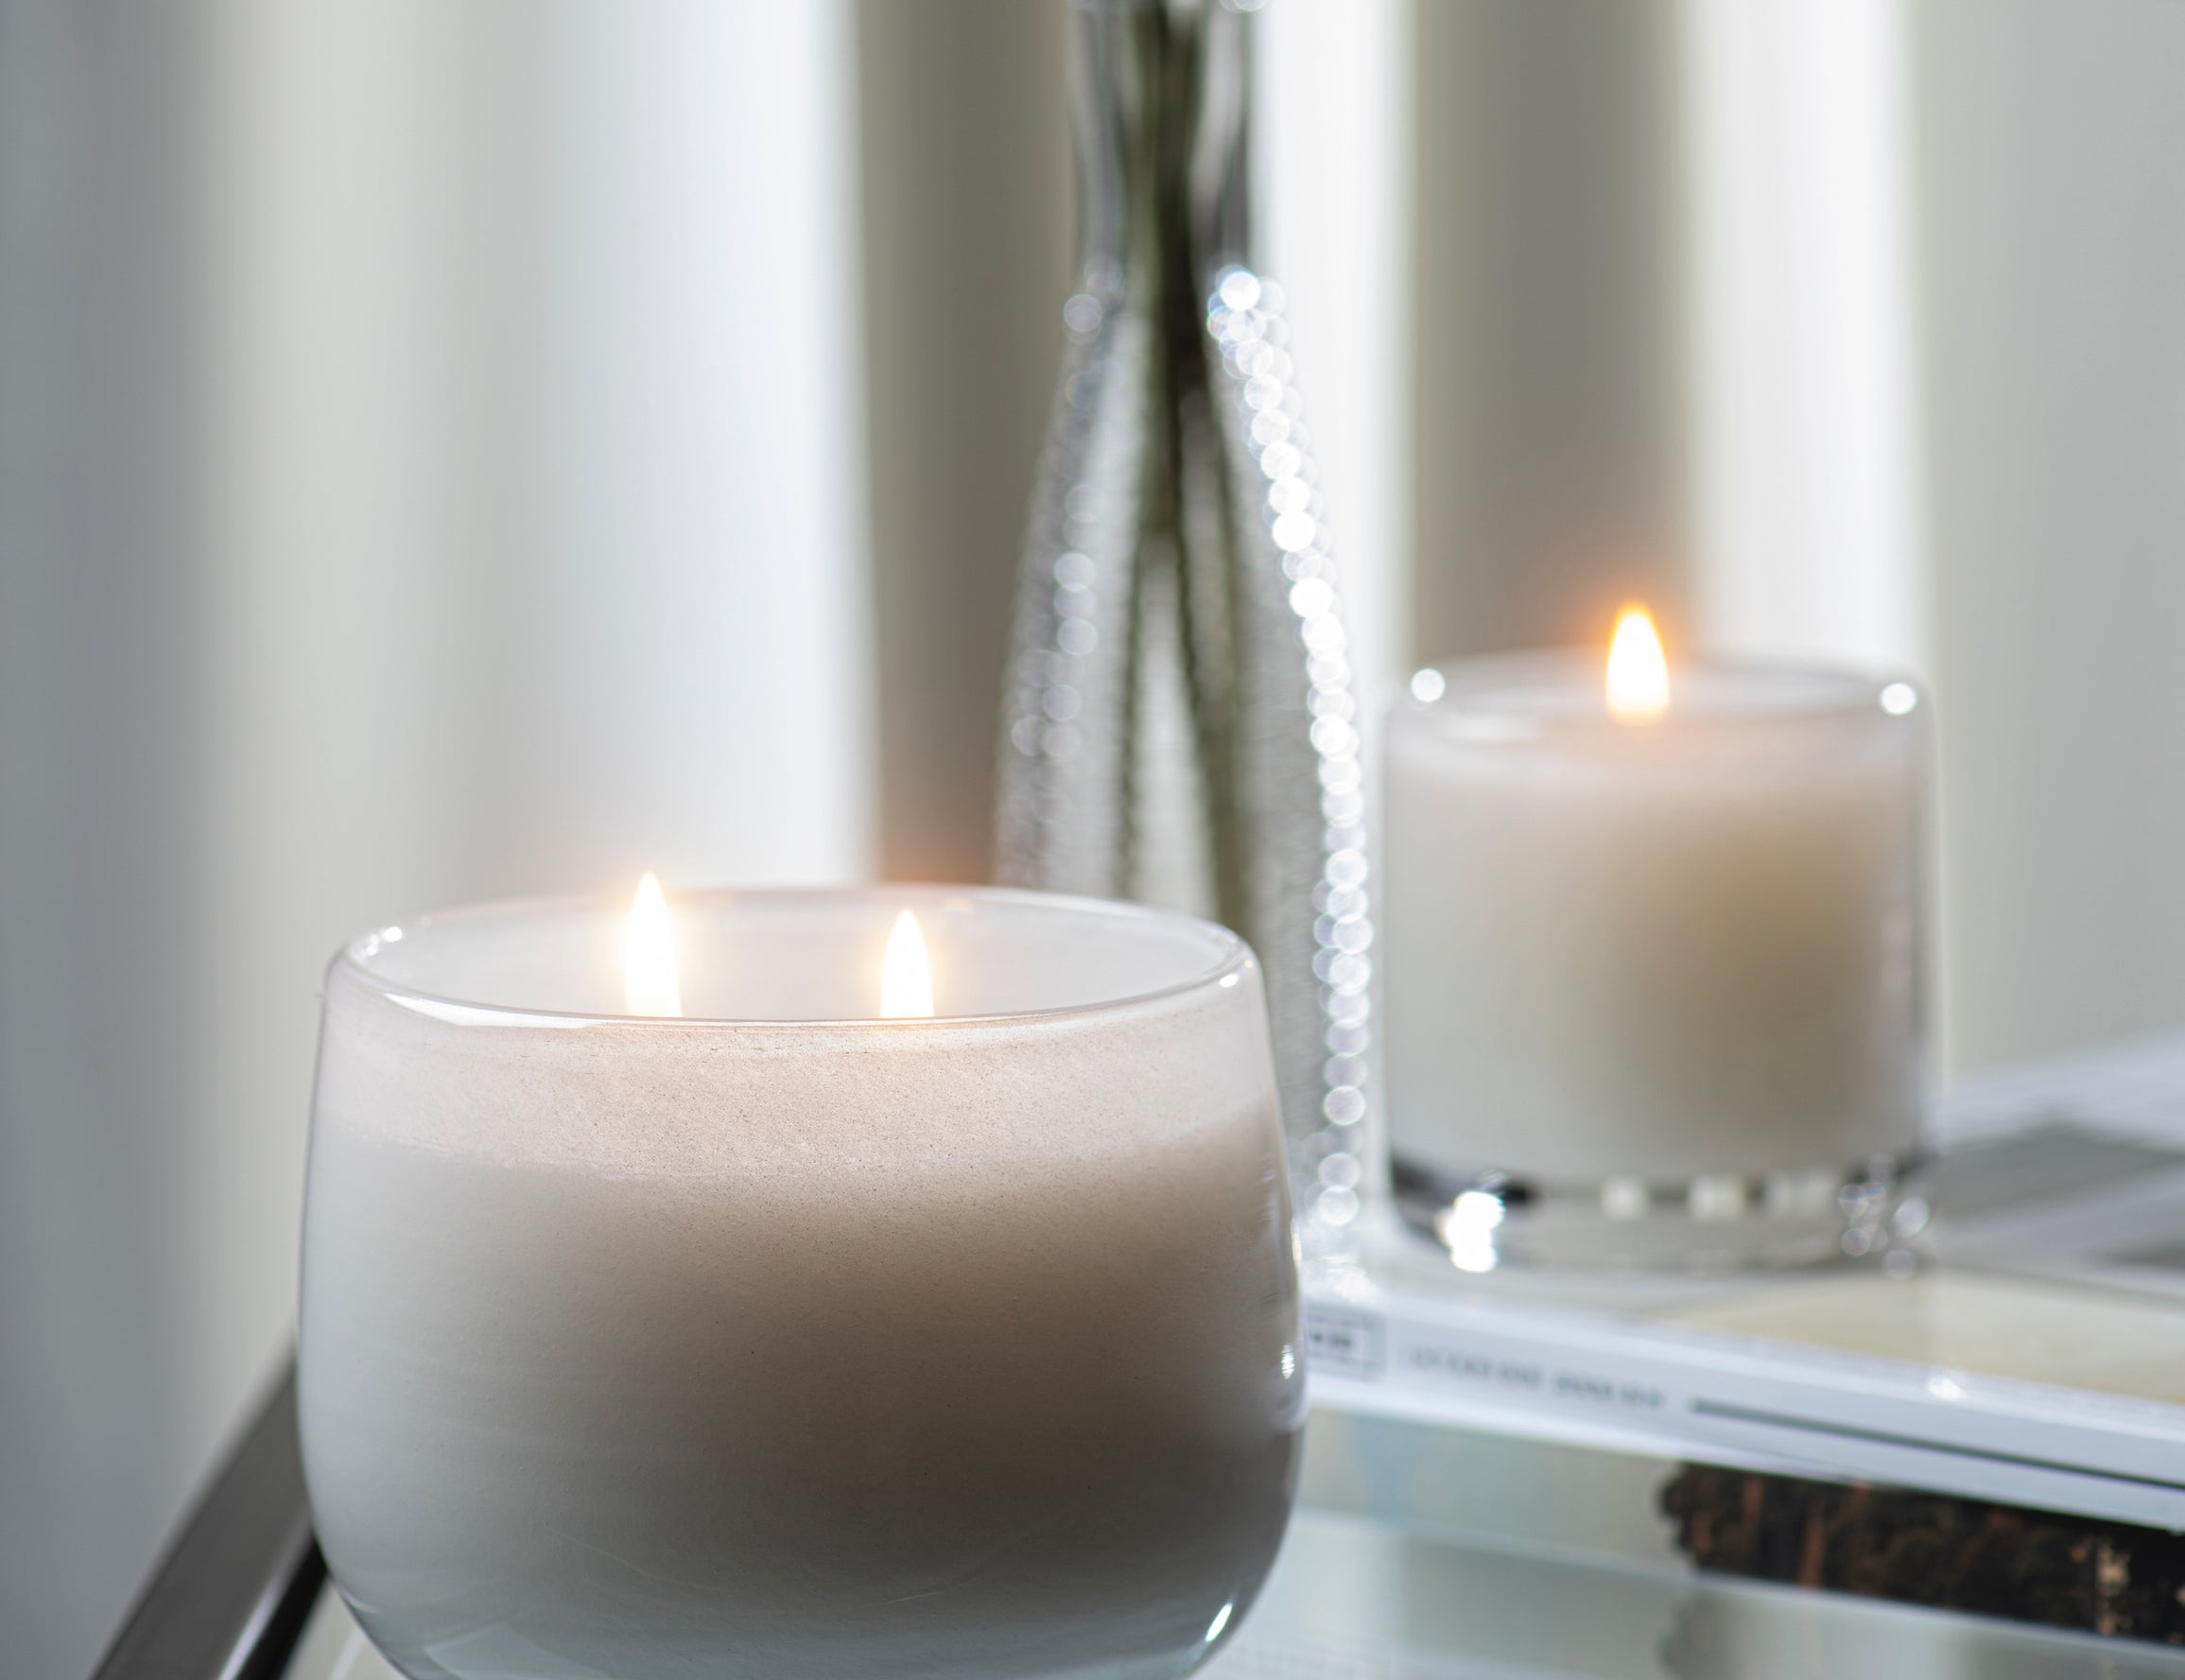 Paris inspired Salon De Tabac white two wick candle by Alixx with earthy oak wood, warm bourbon, and sweet plum nectar fragrance.  Set in white and silver interior.